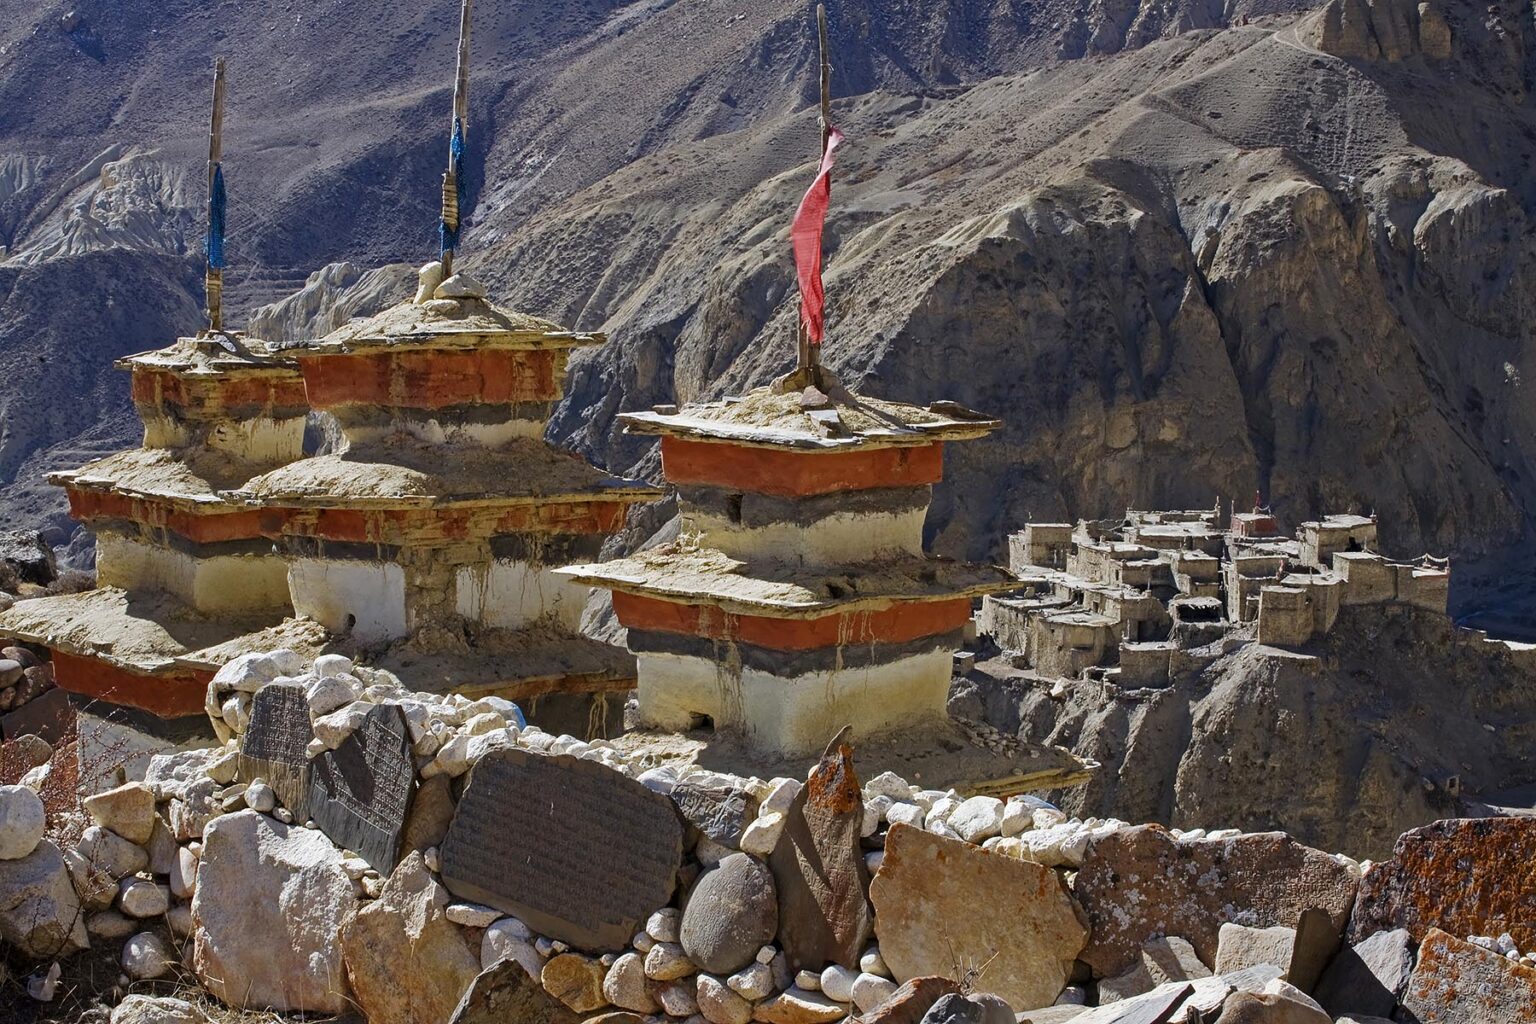 BUDDHIST CHORTENS and the TIBETAN VILLAGE of PHU which  is located in a remote valley at 4200 meters on the NAR PHU TREK - ANNAPURNA CONSERVATION AREA, NEPAL